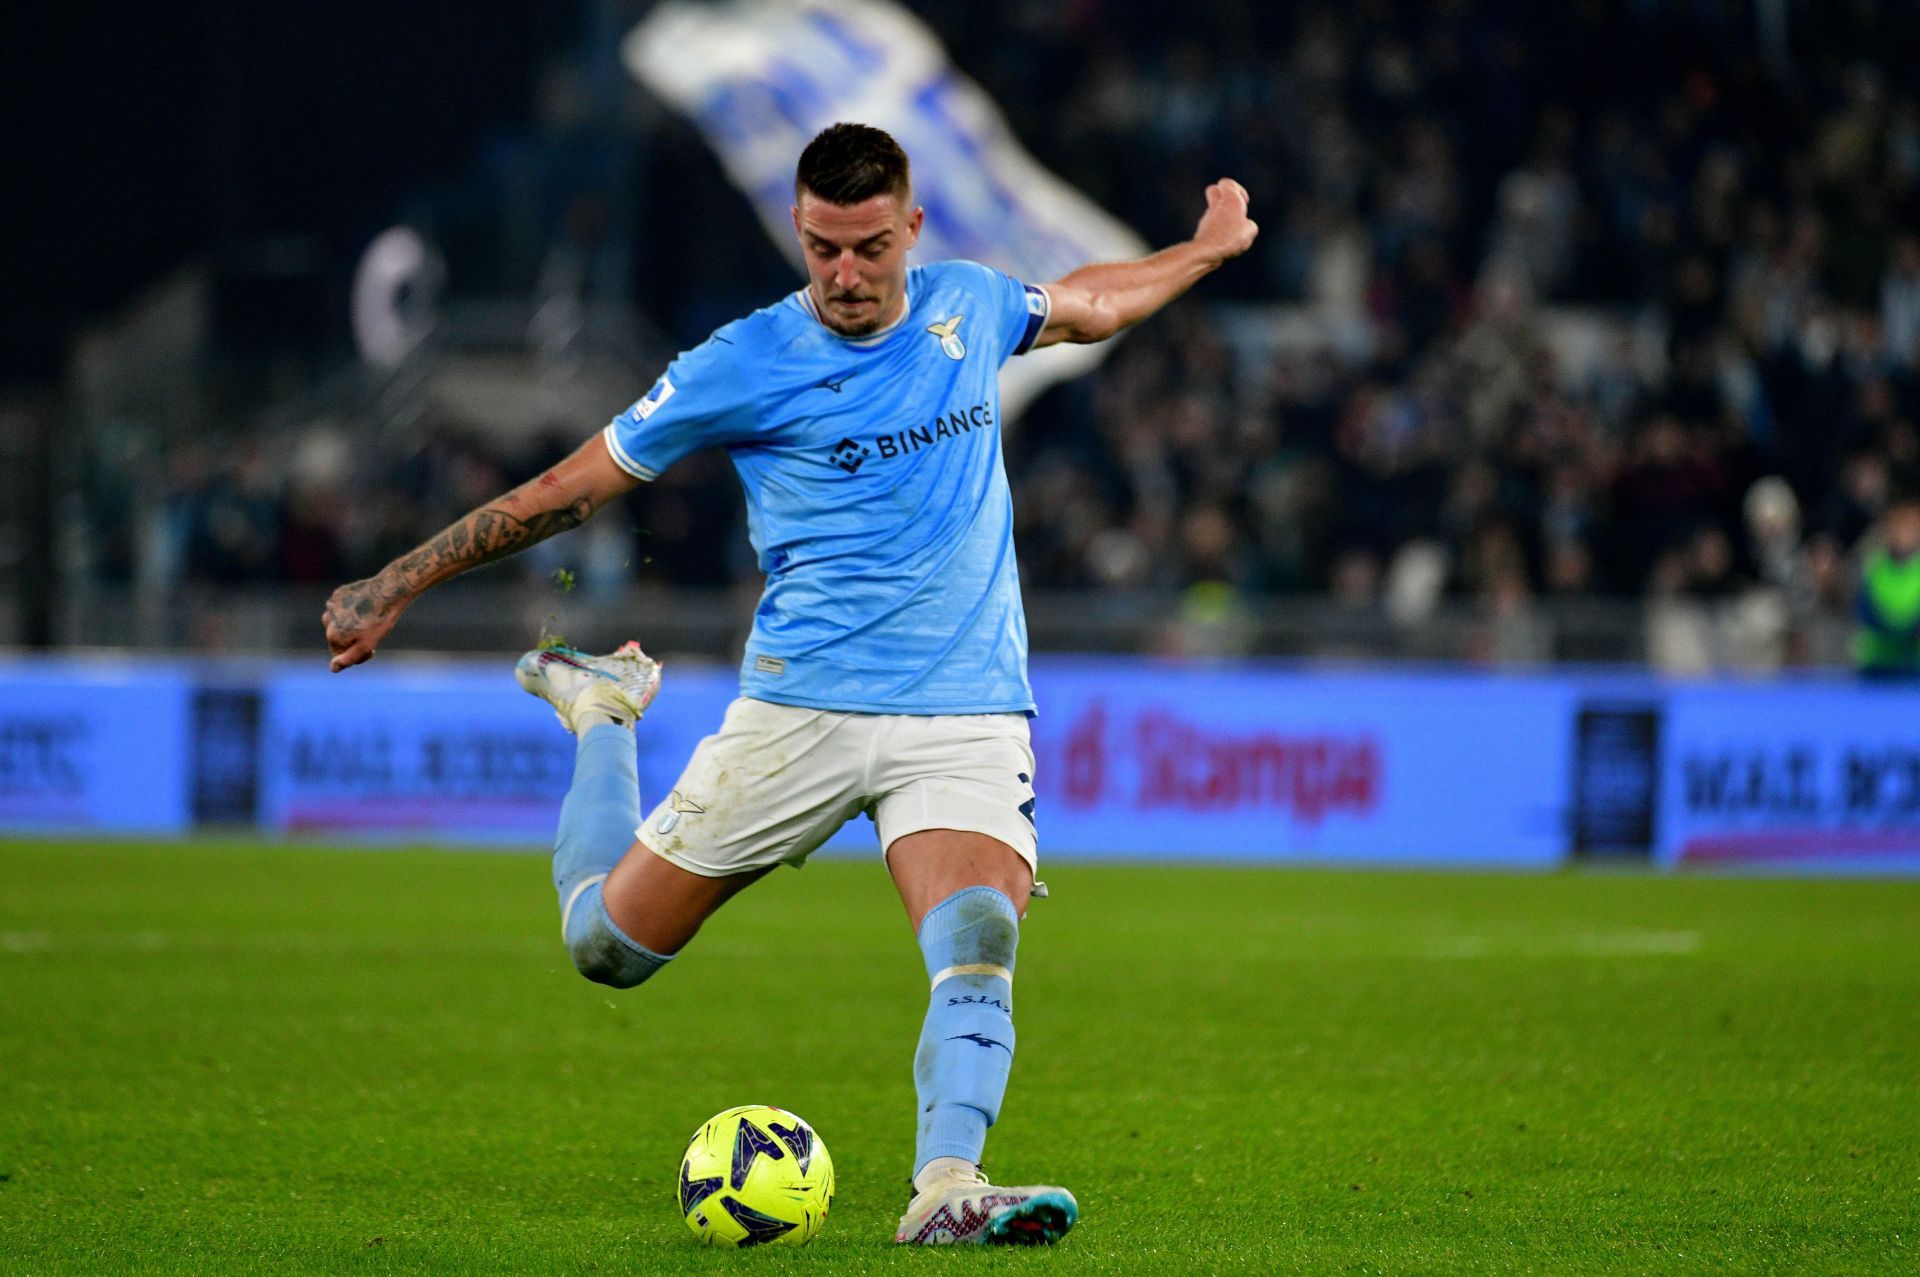 SS Lazio midfield general Sergej Milinkovic-Savic has been in impeccable touch this season